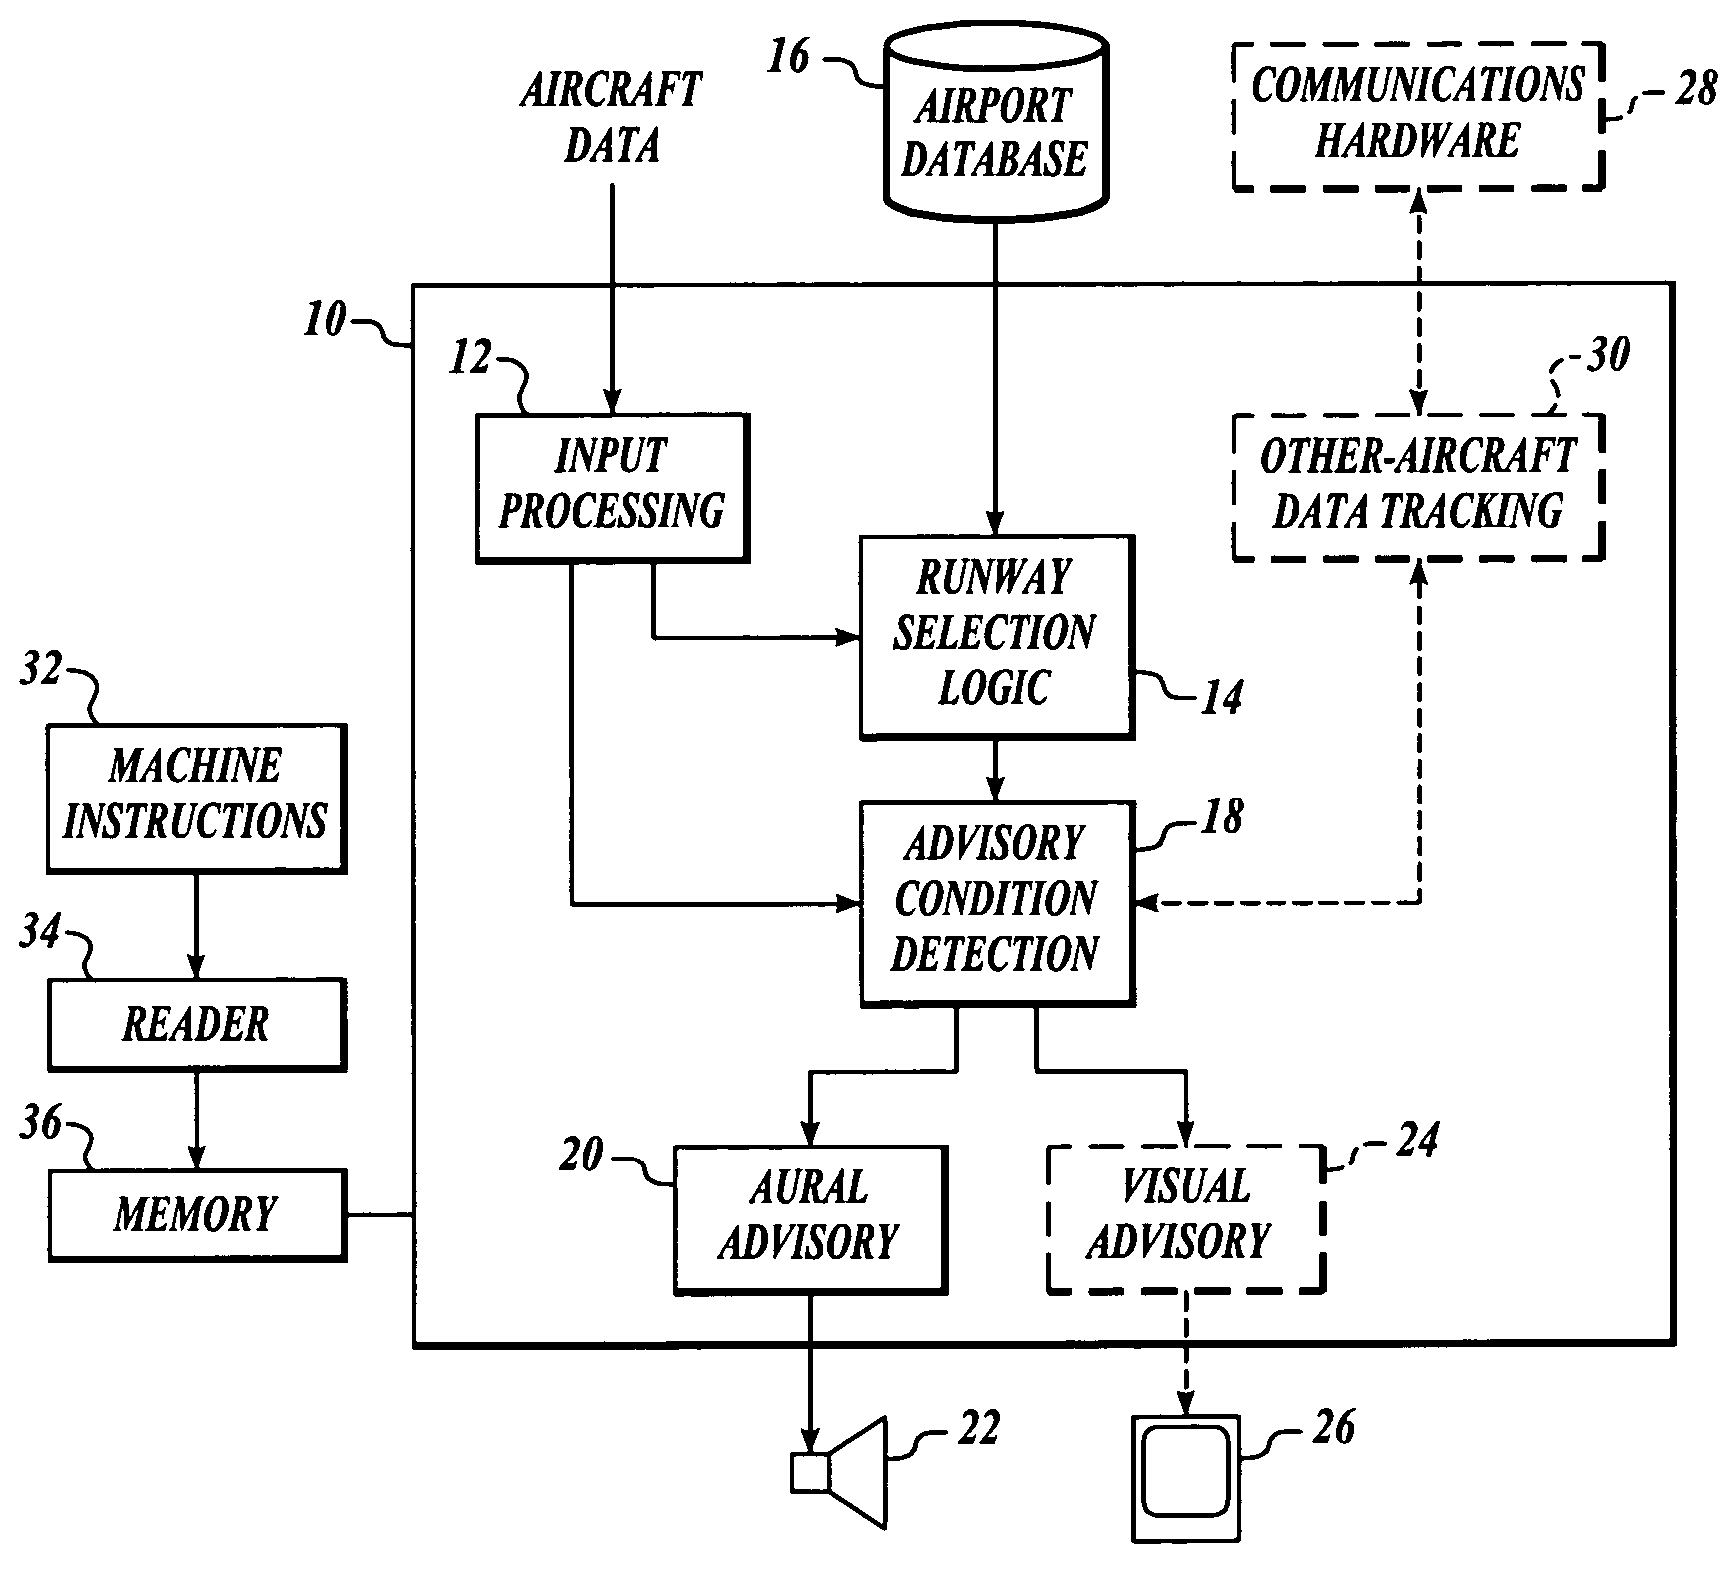 Ground operations and advanced runway awareness and advisory system